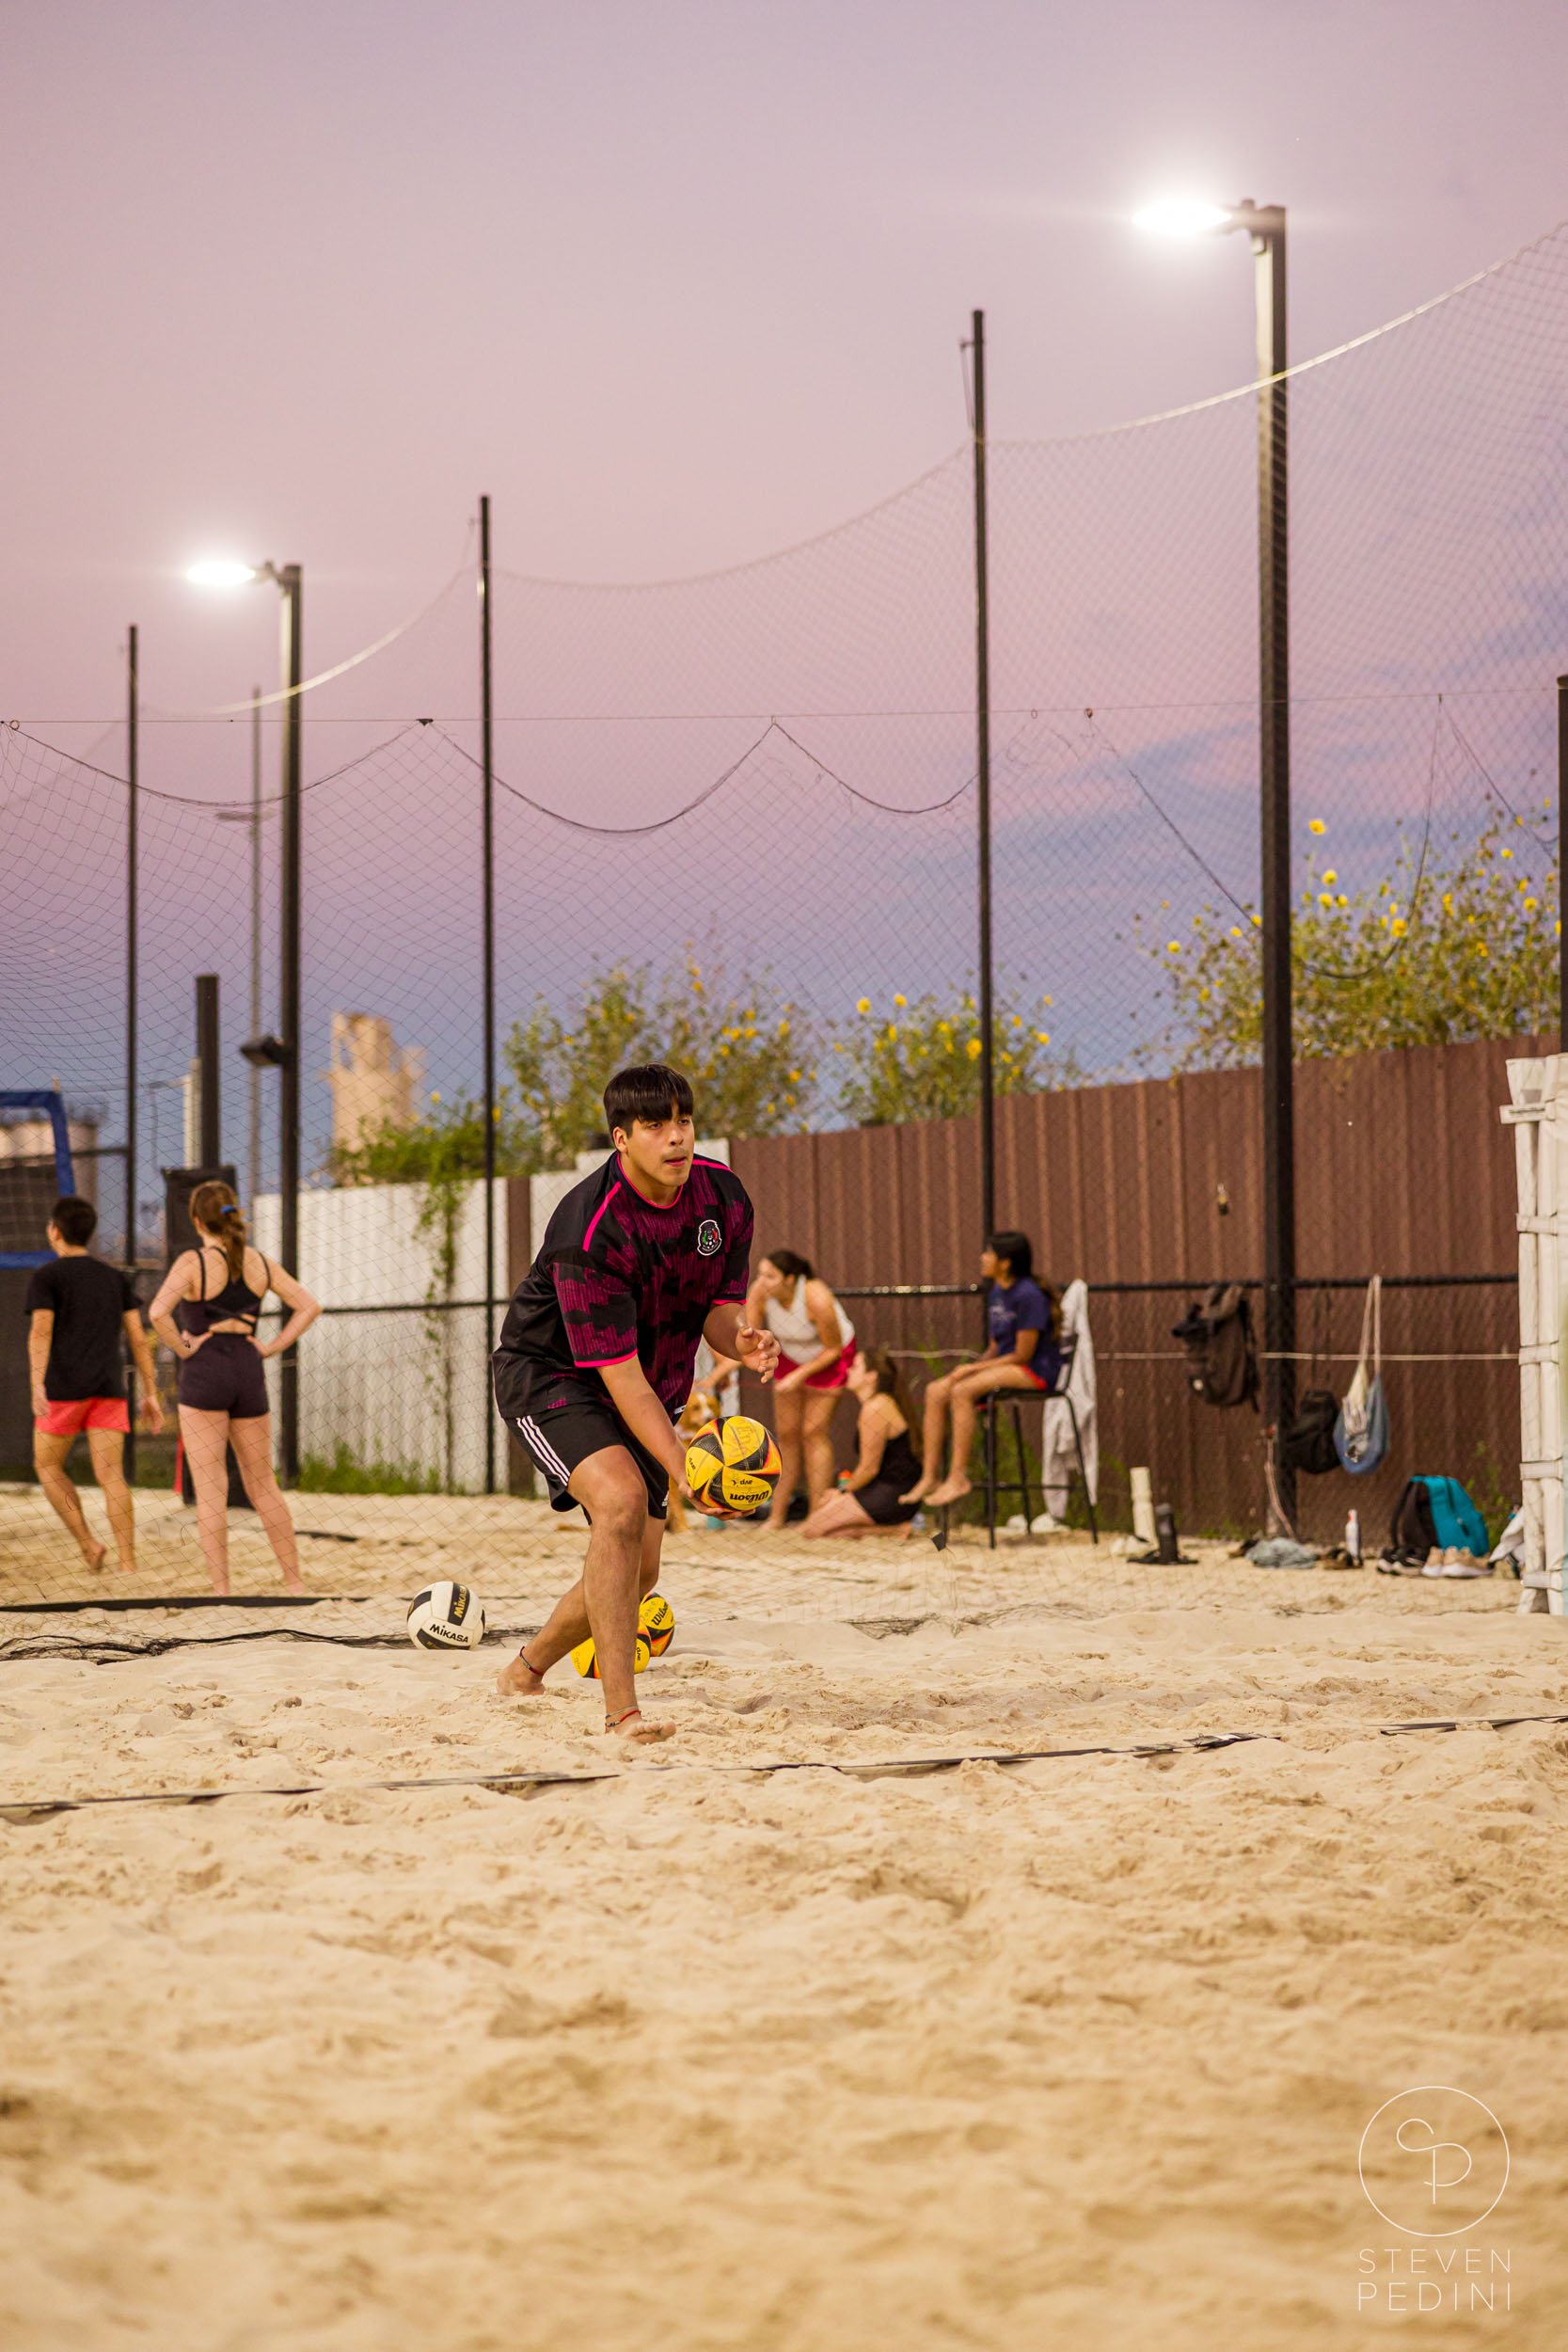 Steven Pedini Photography - Bumpy Pickle - Sand Volleyball - Houston TX - World Cup of Volleyball - 00280.jpg